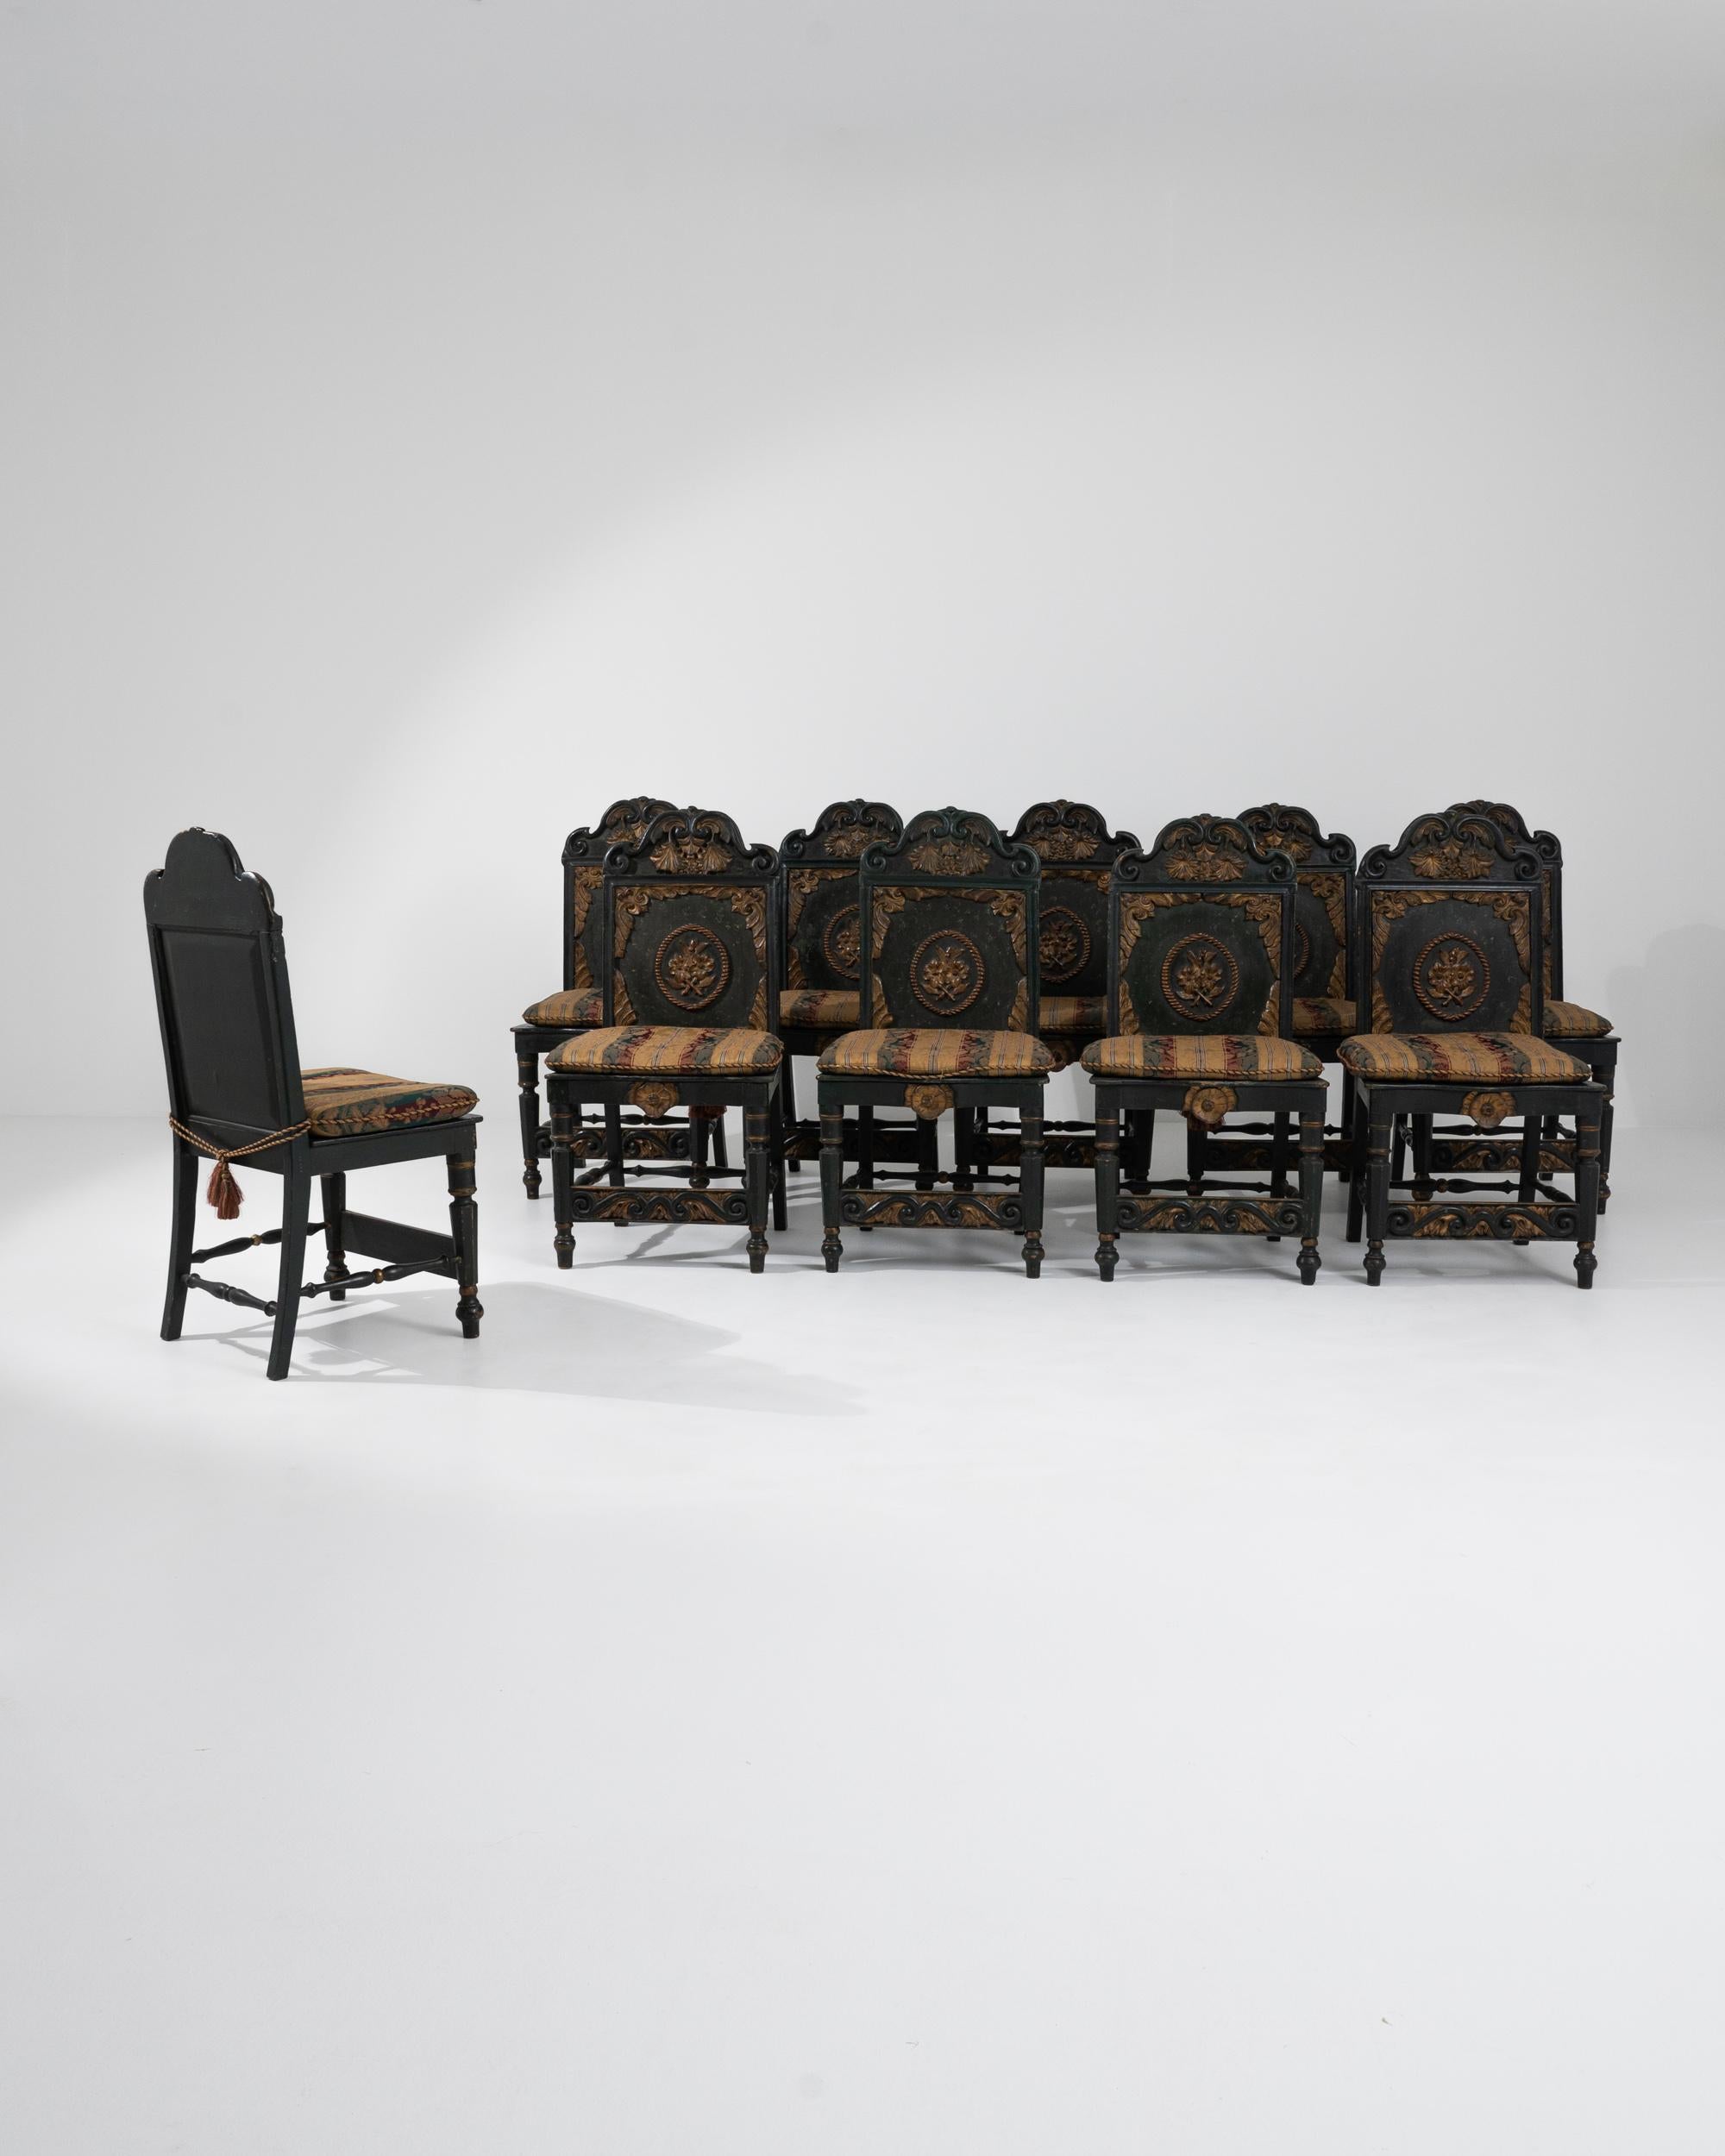 A set of vintage Portuguese wooden chairs with cushioned seats from the 20th century. Made in a historic style, this set of majestic chairs is painted forest green and gold, fit with seat cushions to radiate regality and precise uniformity. Lavishly